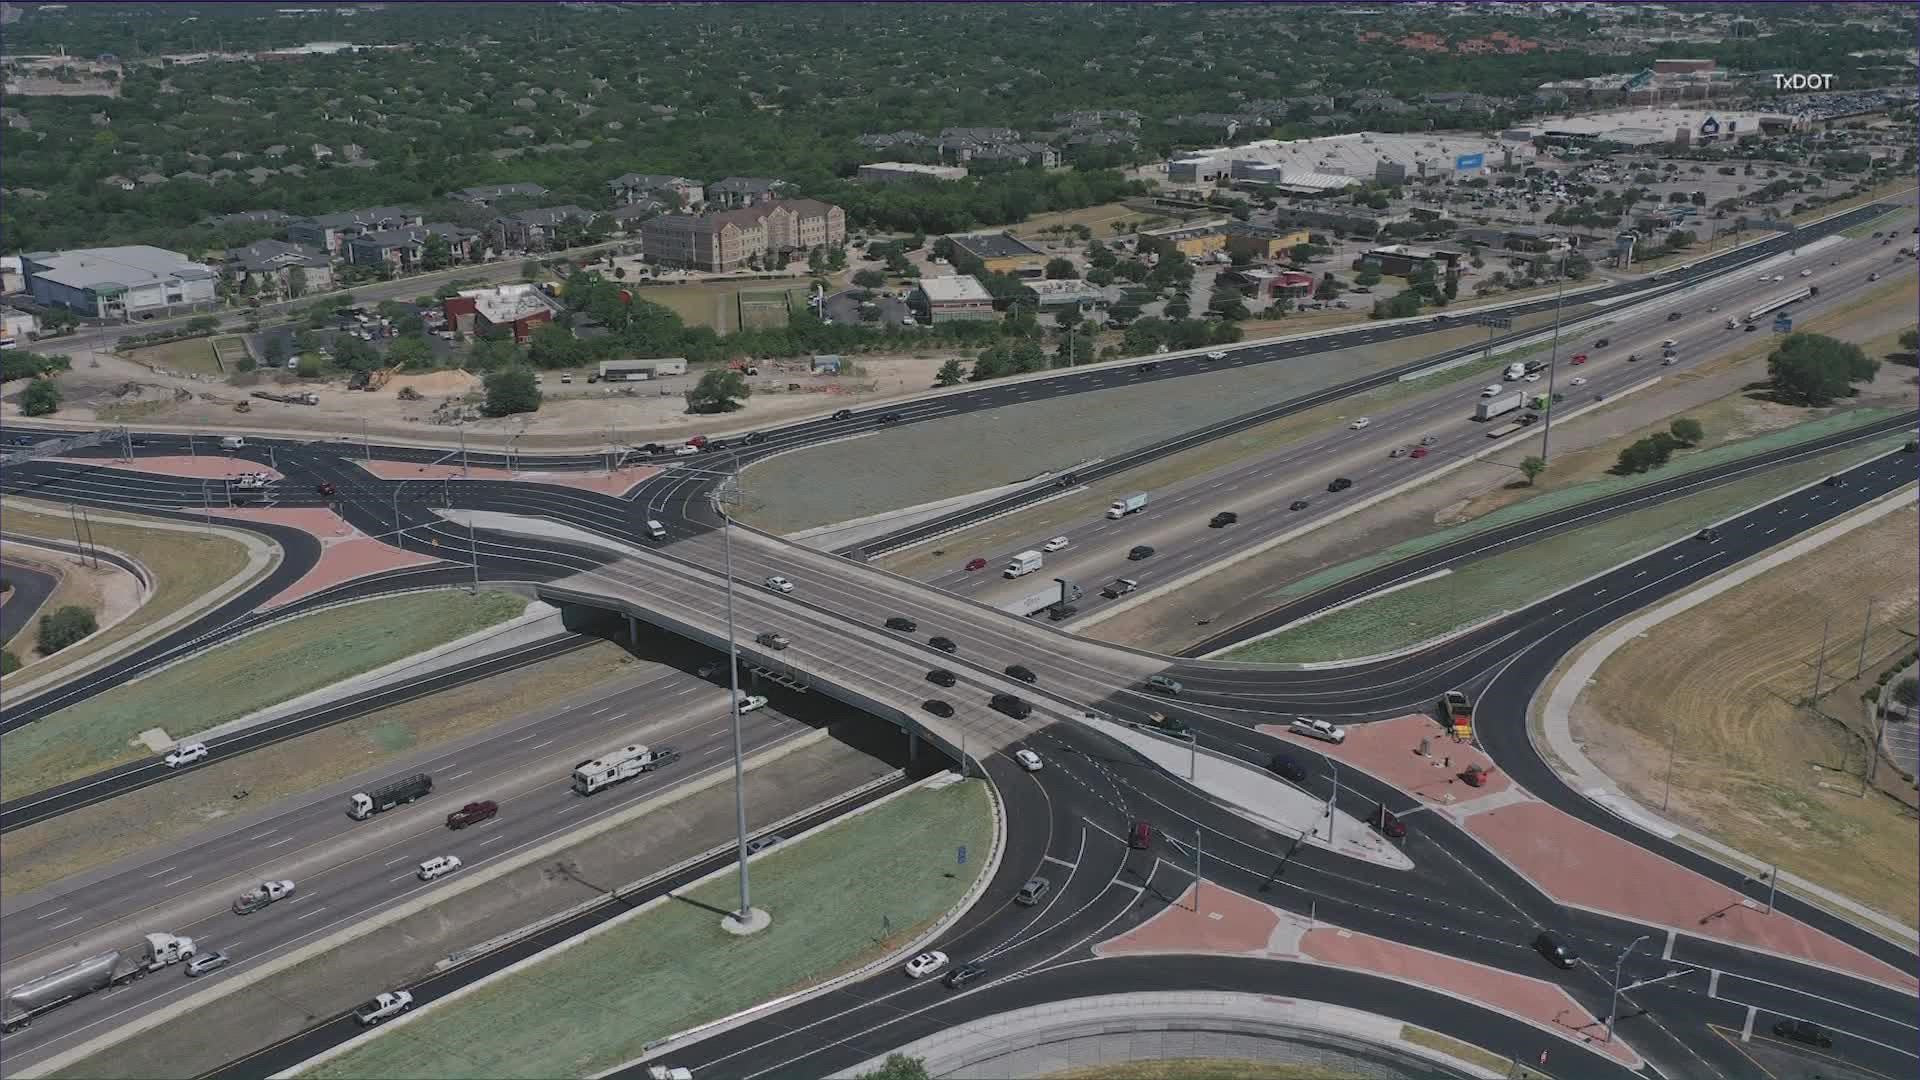 On Wednesday, TxDOT crews cut the ribbon to open the diverging diamond at I-35 and Parmer Lane.